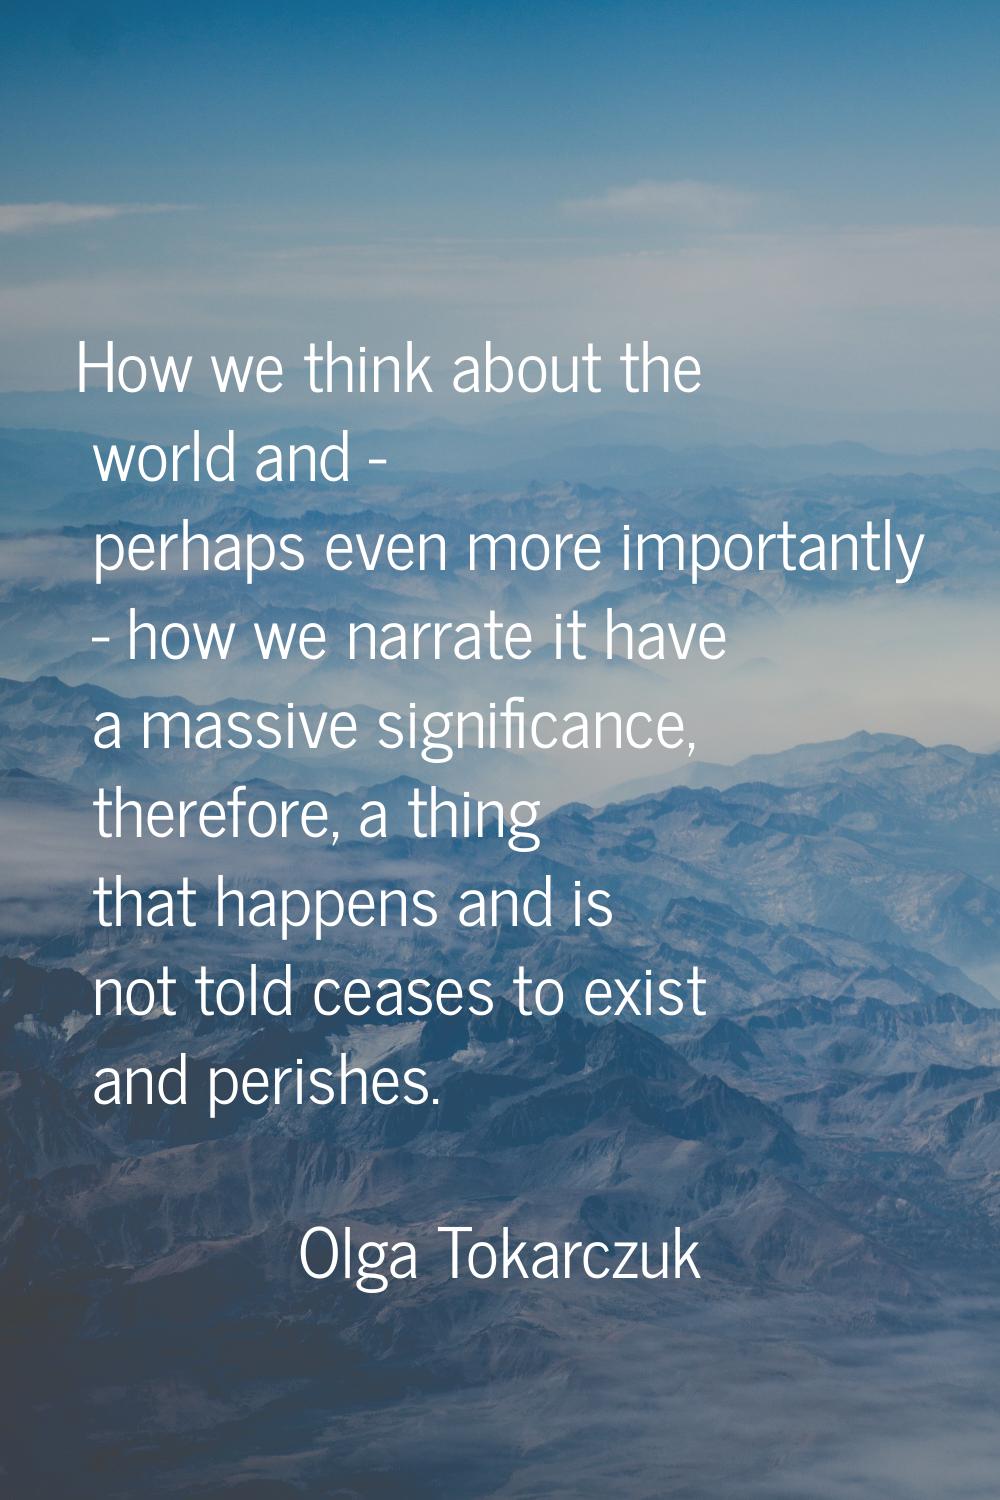 How we think about the world and - perhaps even more importantly - how we narrate it have a massive